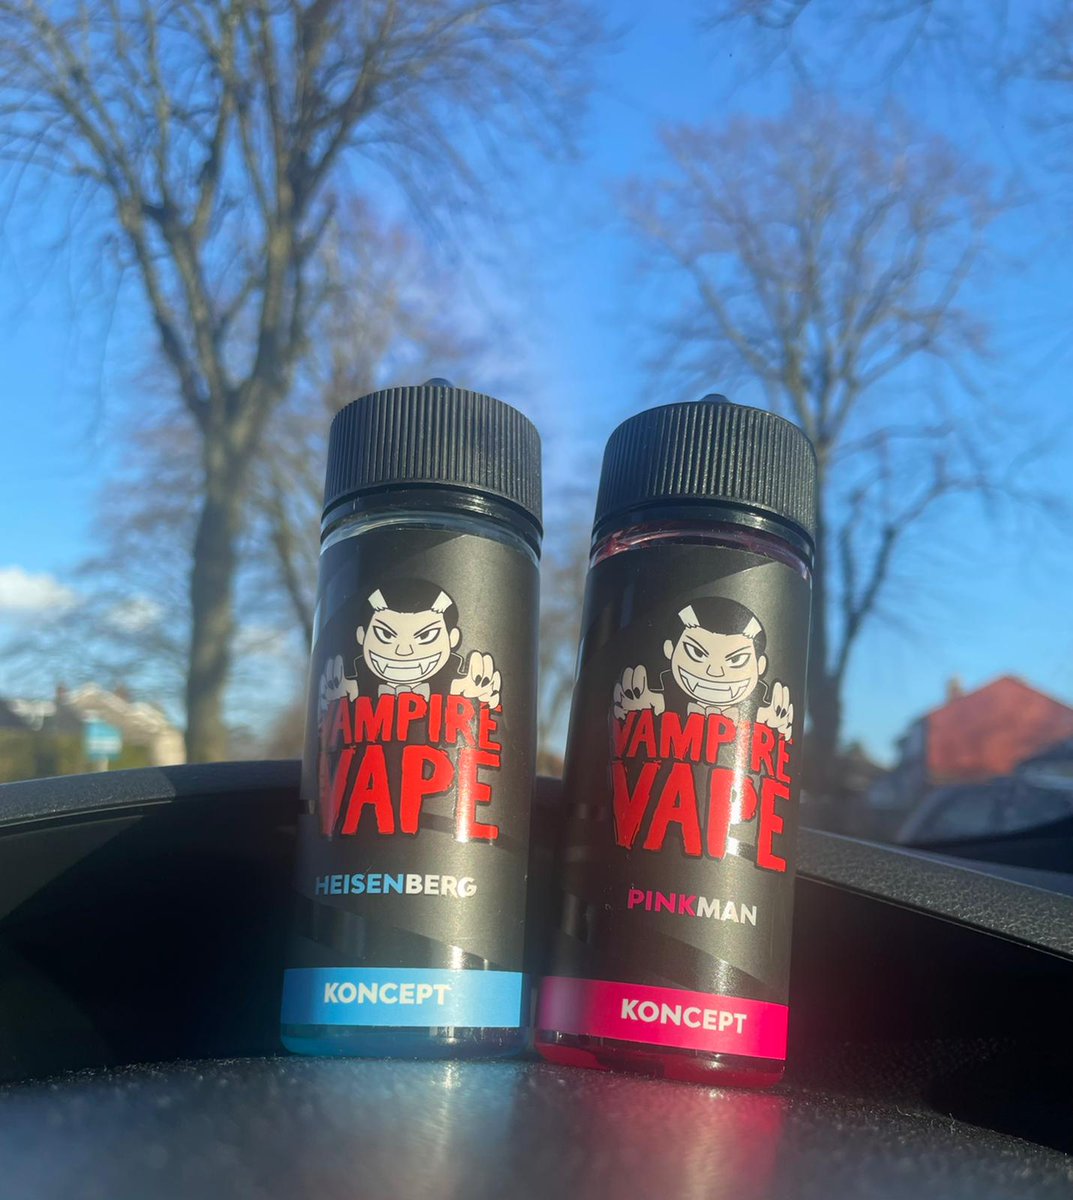 The end of the what felt like quite a dreary month!

Onto bigger and better, speaking of bigger...  Heisenberg  KONCEPT shortfill by Vampire Vape is now available in 100mls 
click link to shop ⬇️
tmbnotes.co/heisenberg-kon…

#heisenberg #vapeshortfill #vampirevape #vaping #eliquid